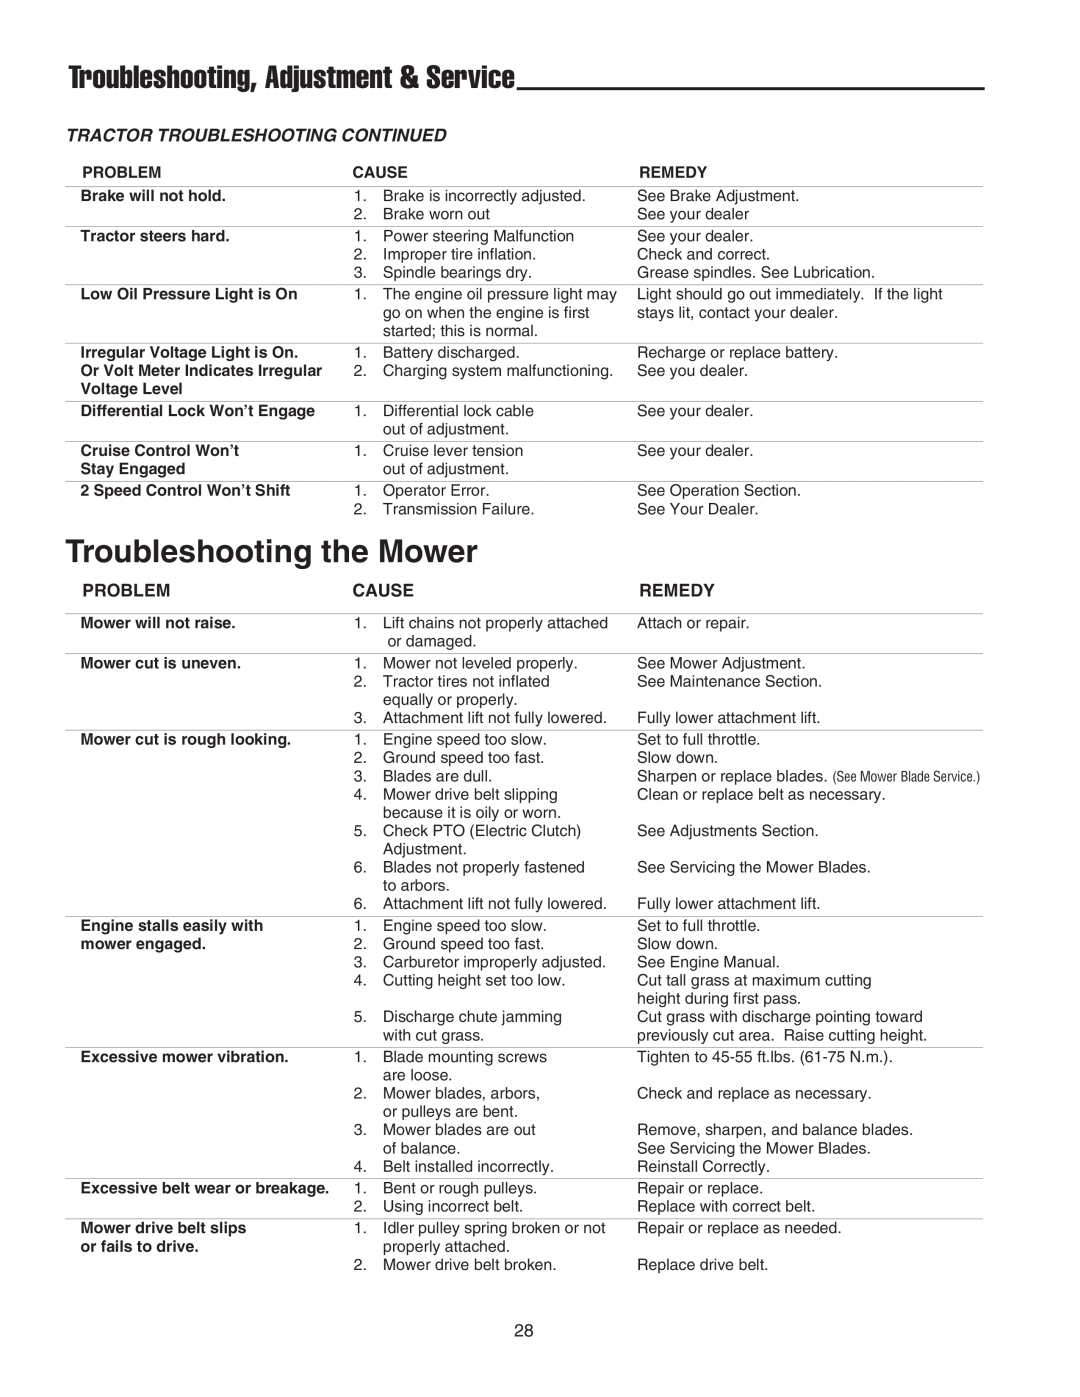 Simplicity 1693563 Troubleshooting, Adjustment & Service, Troubleshooting the Mower, Tractor Troubleshooting Continued 